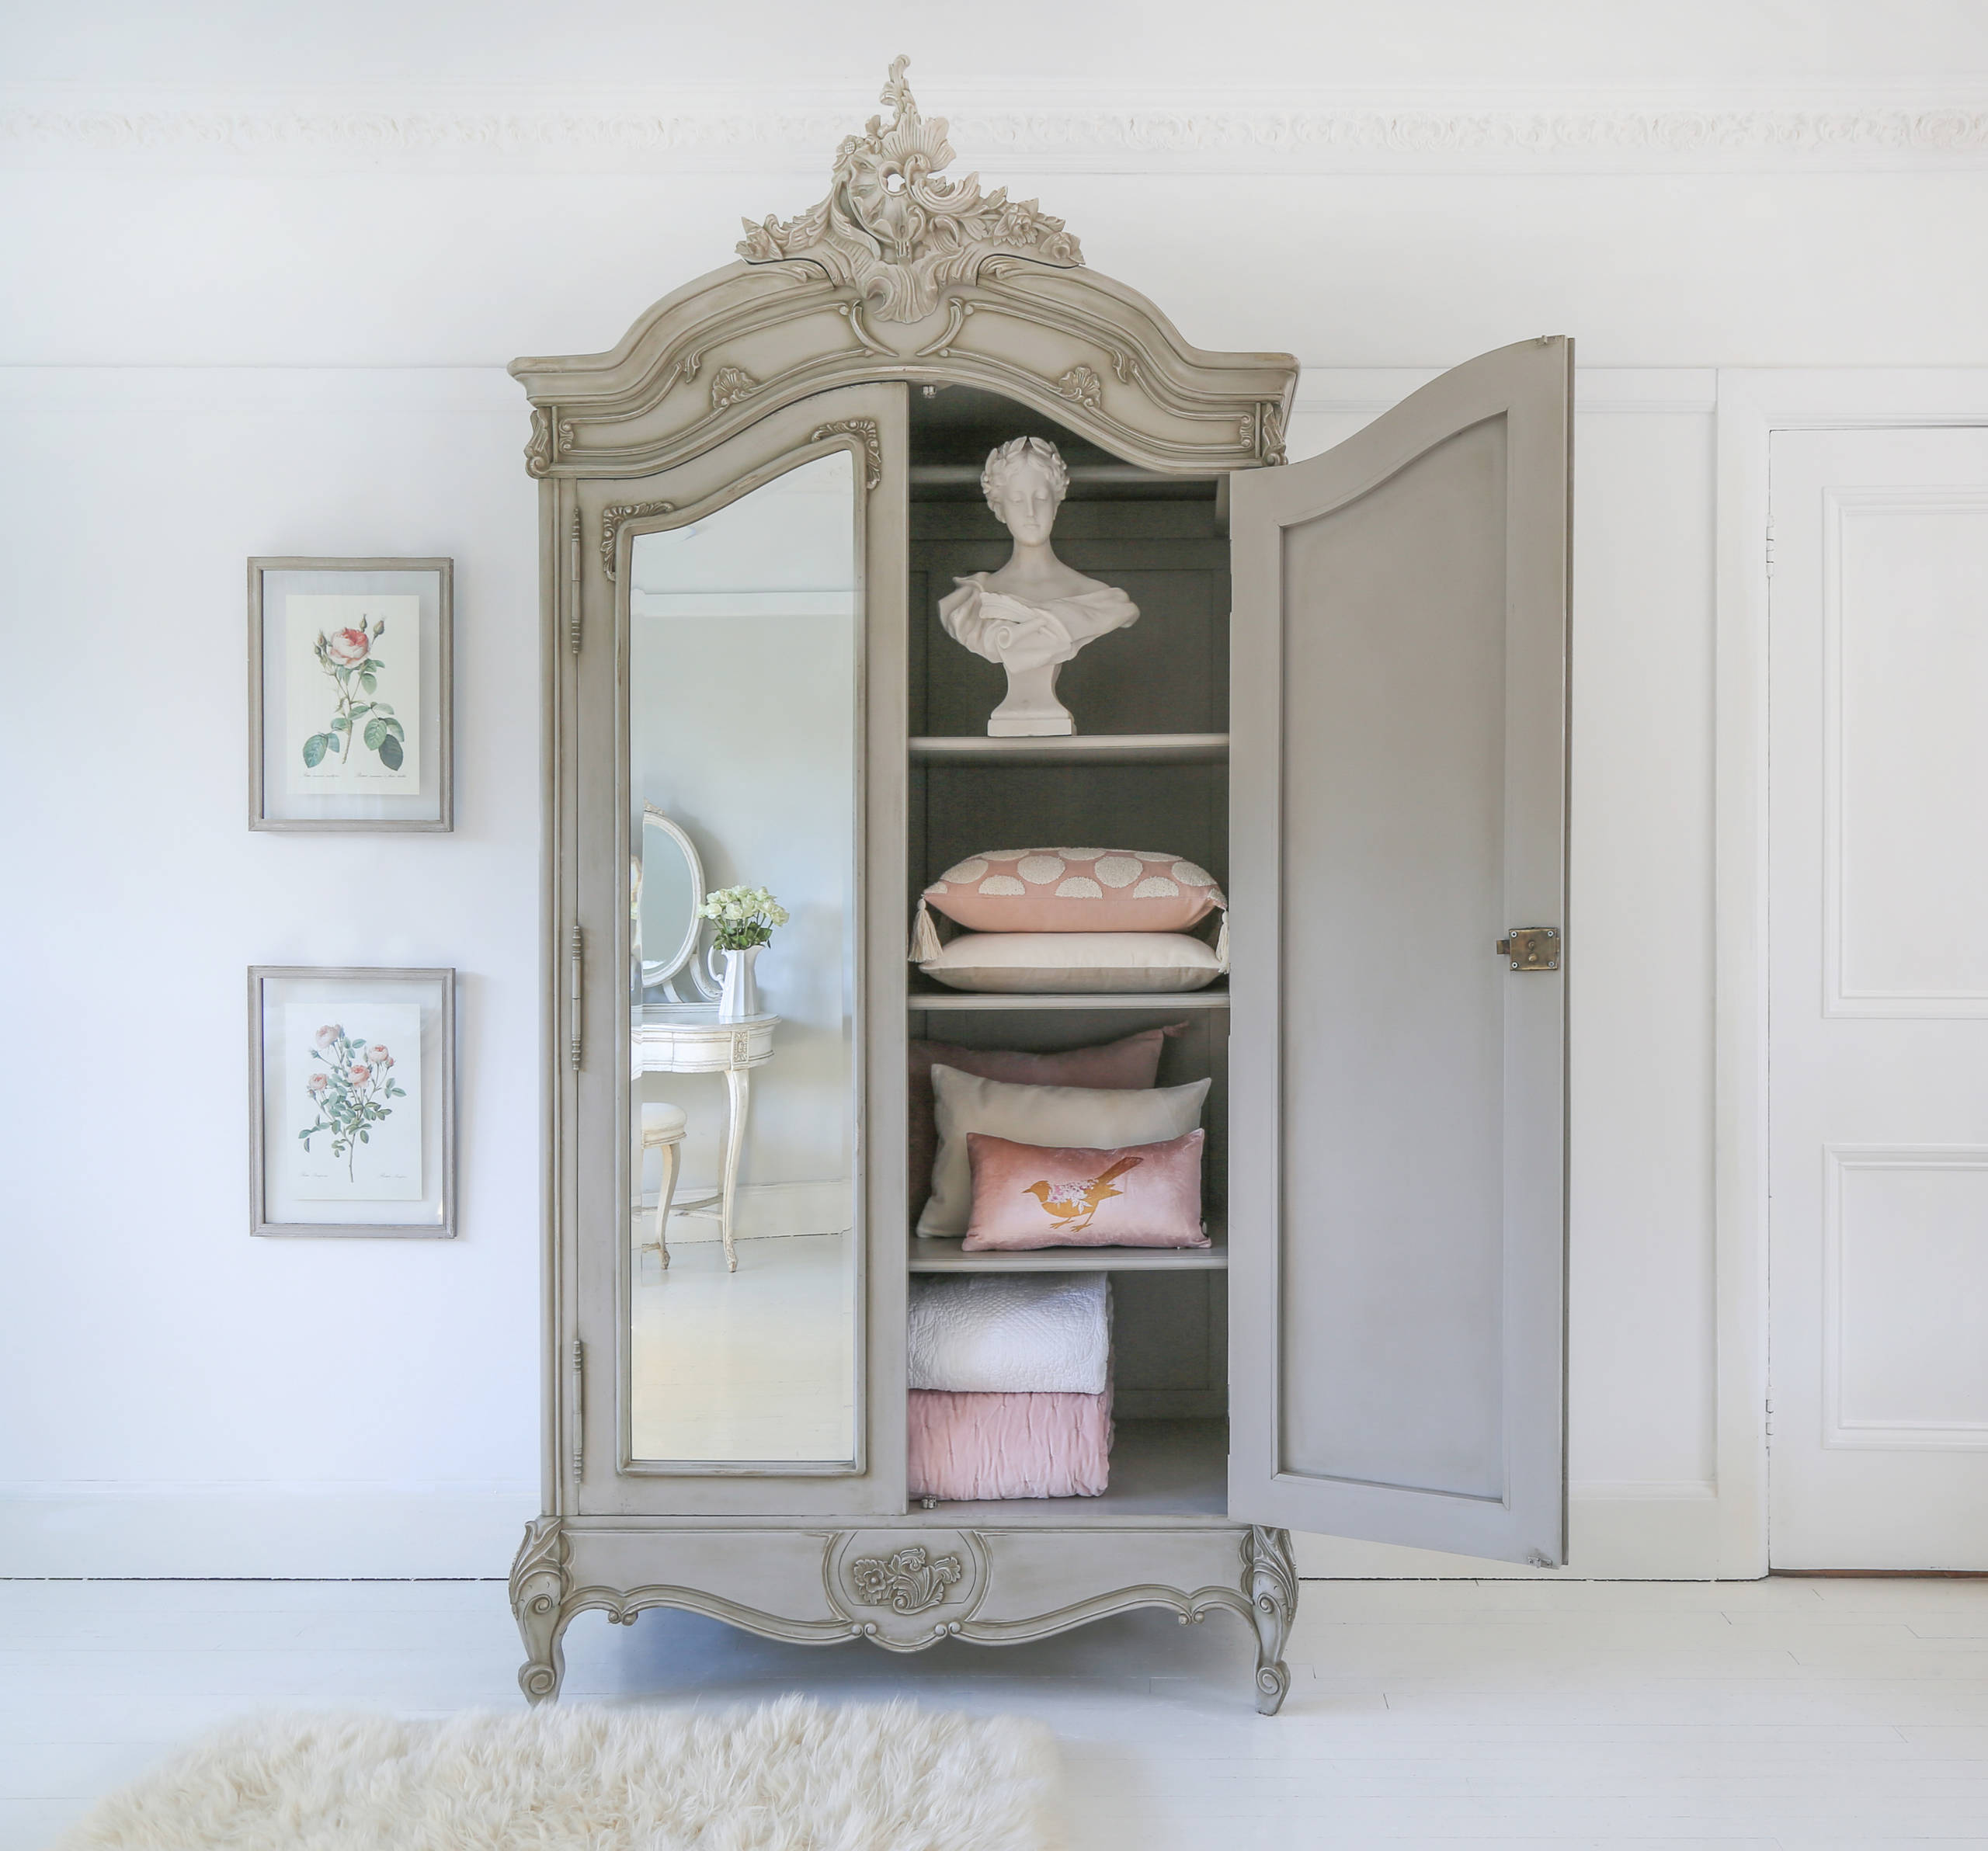 Normandy 2-Door Mirrored French Armoire - Traditional - Bedroom - Sussex -  by French Bedroom | Houzz